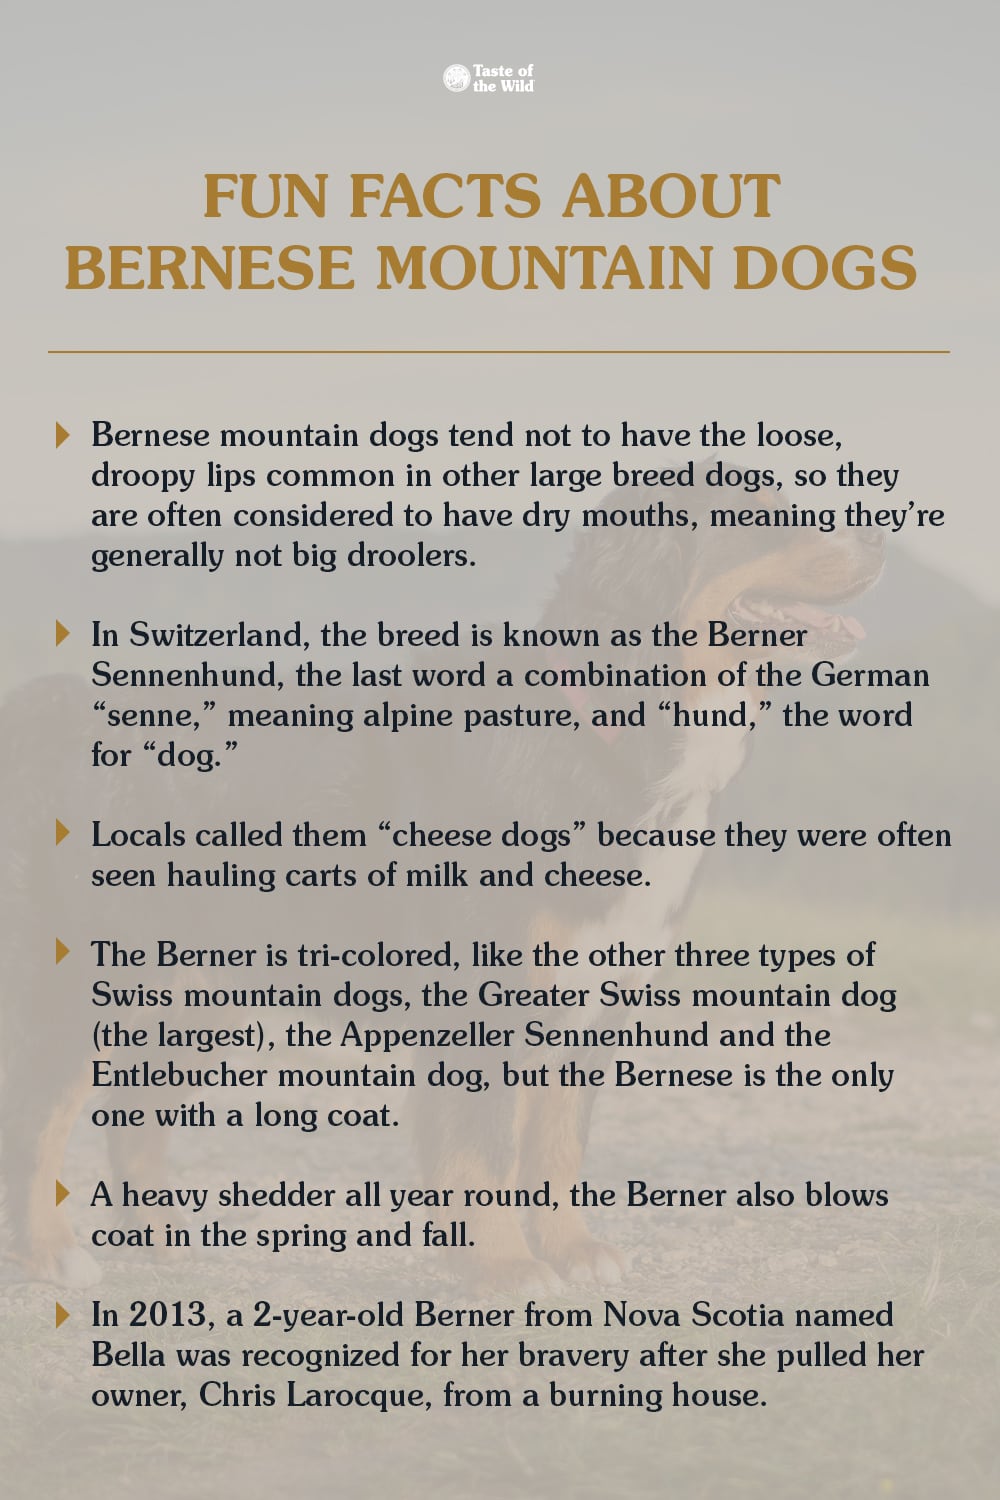 Infographic of fun facts about Bernese mountain dogs